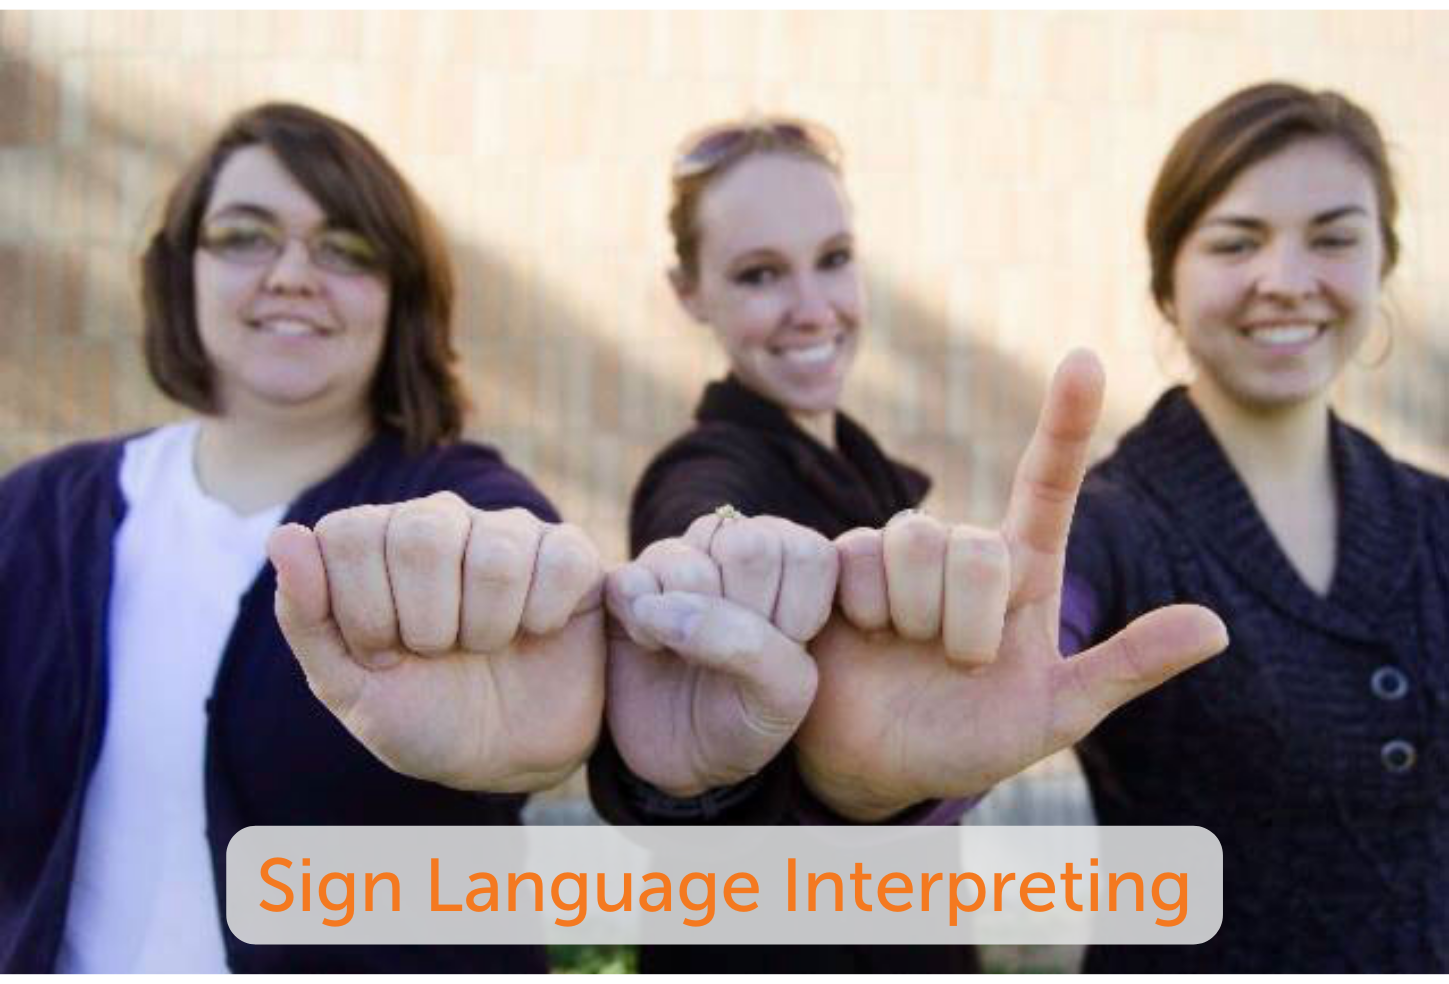 Sign language student practicing signs